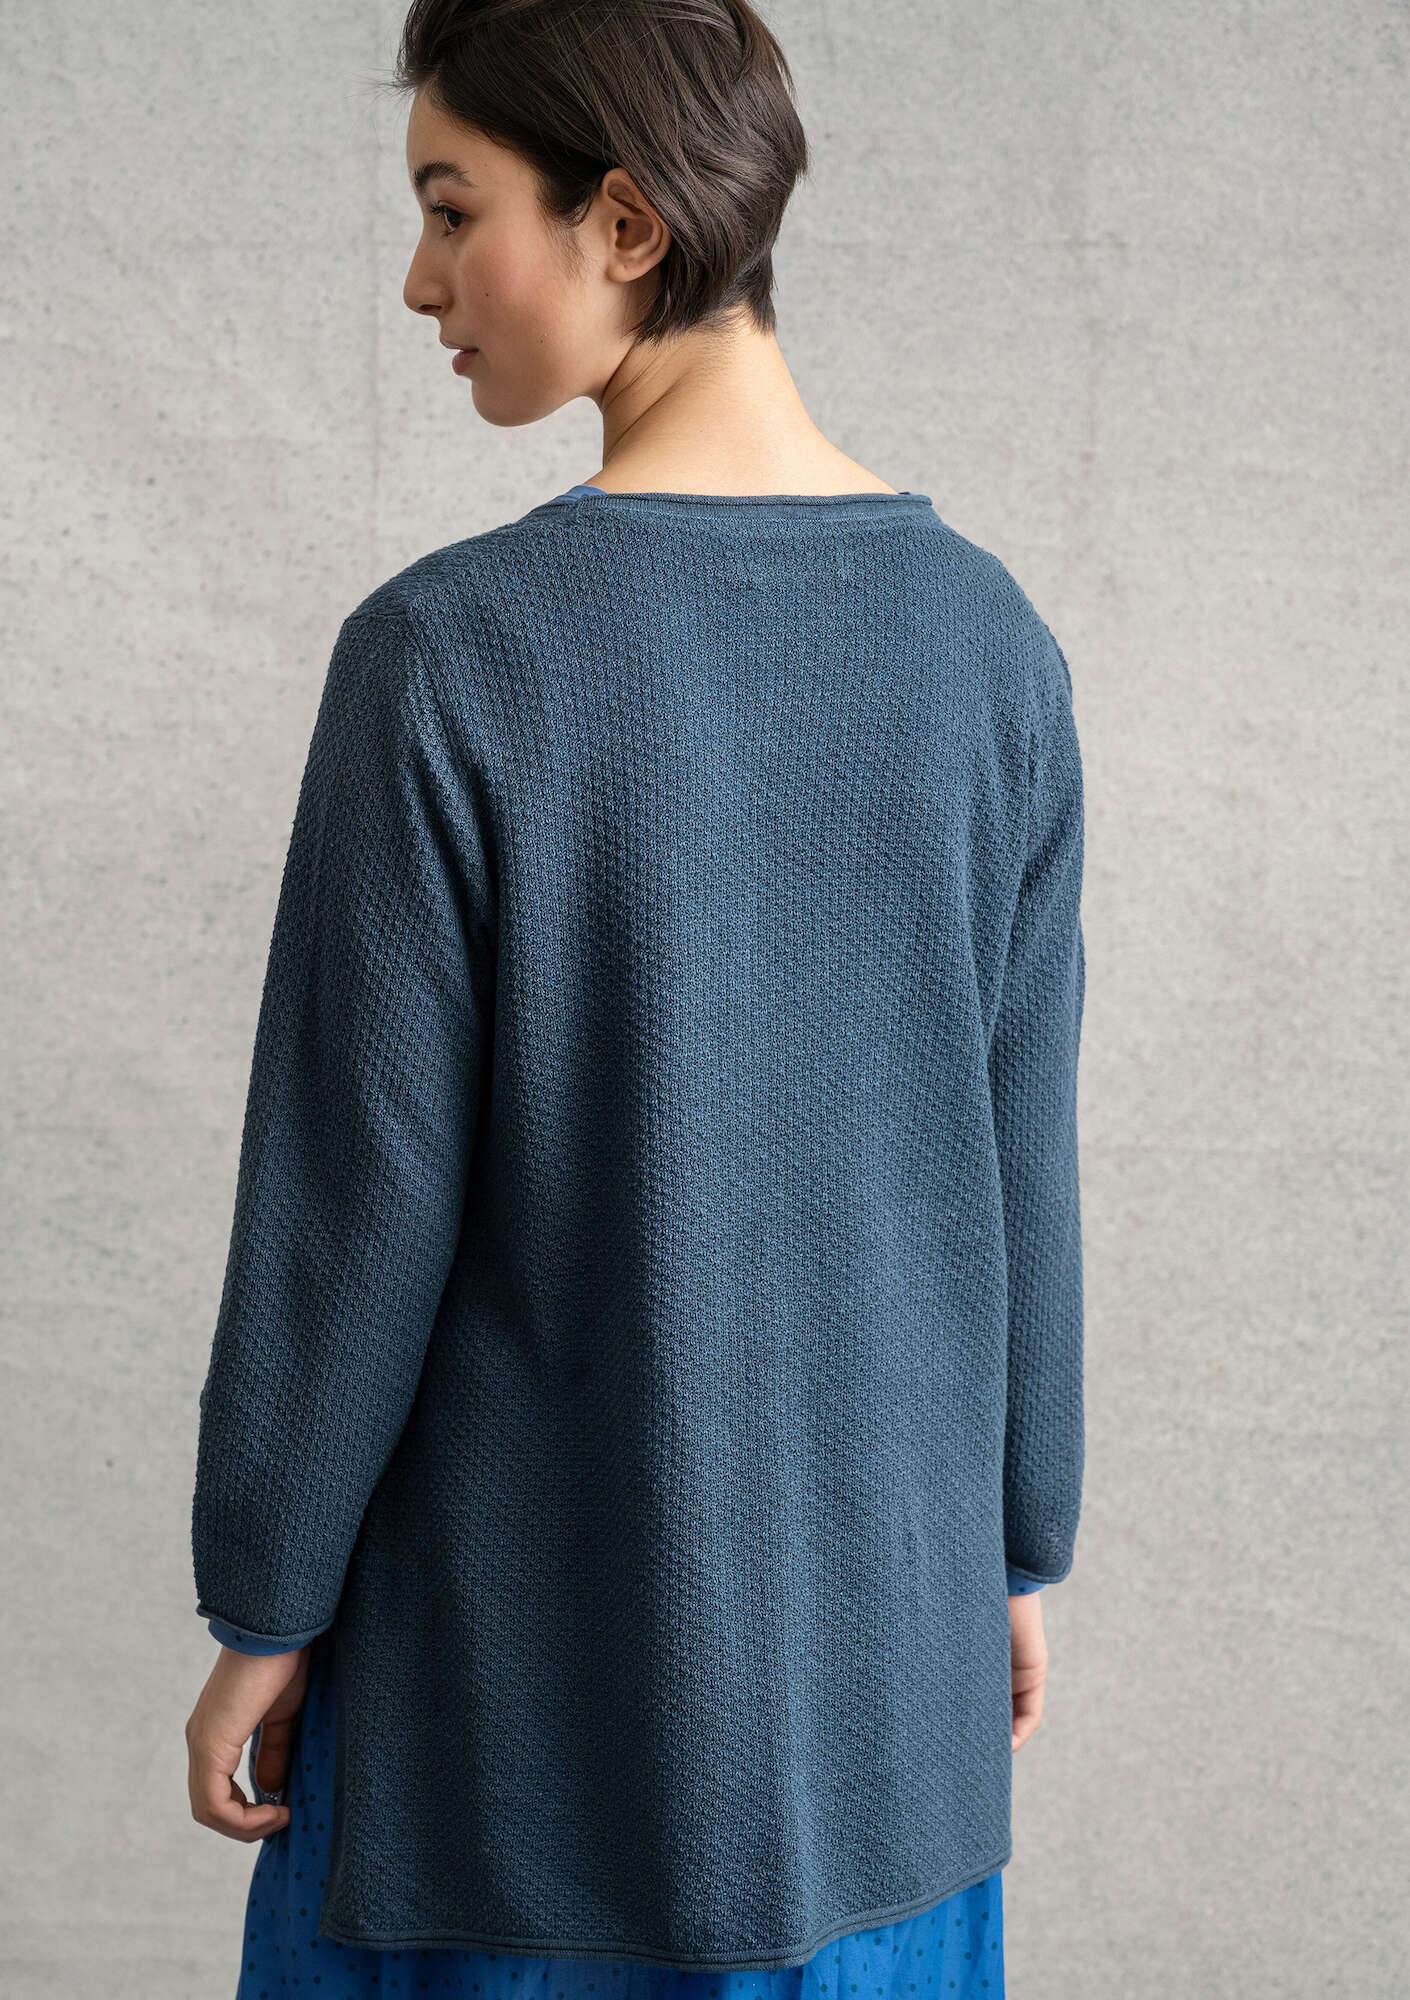 Tunic in a recycled linen knit fabric indigo